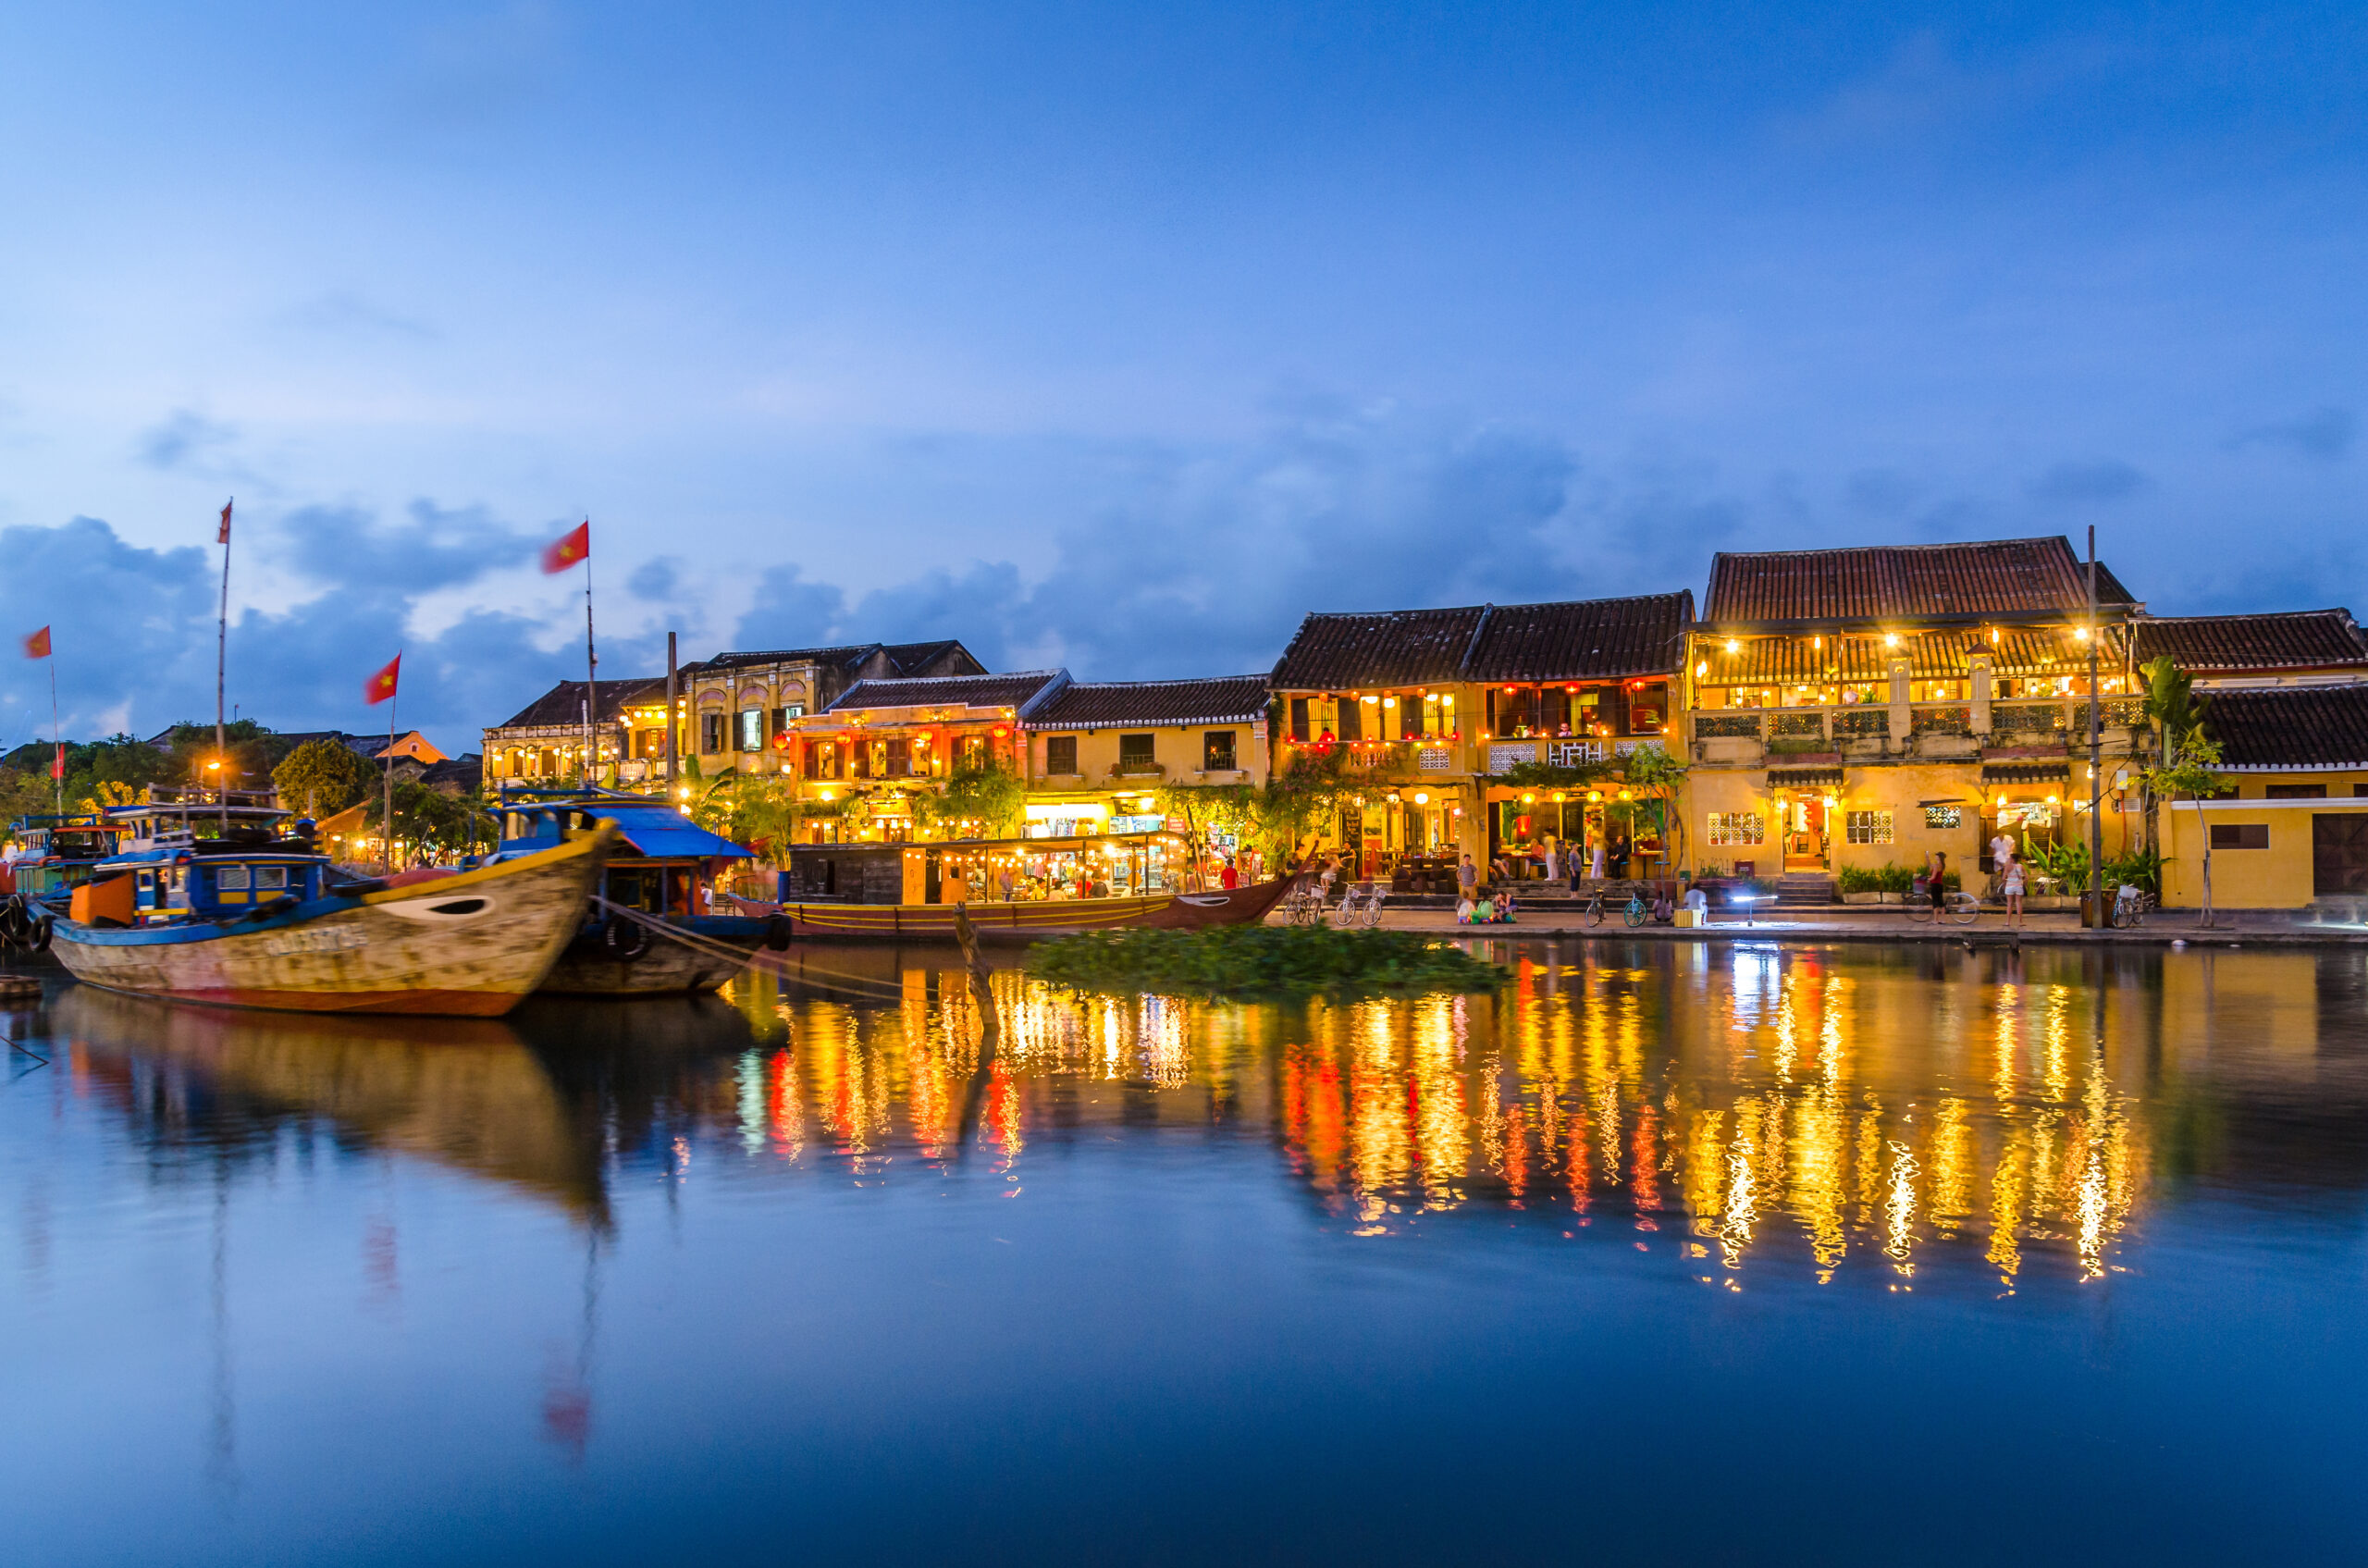 shutterstock 363946115 hoi an during sunset vietnam town ancient hoian night river indochina old amazing asia buildings channel dawn herit